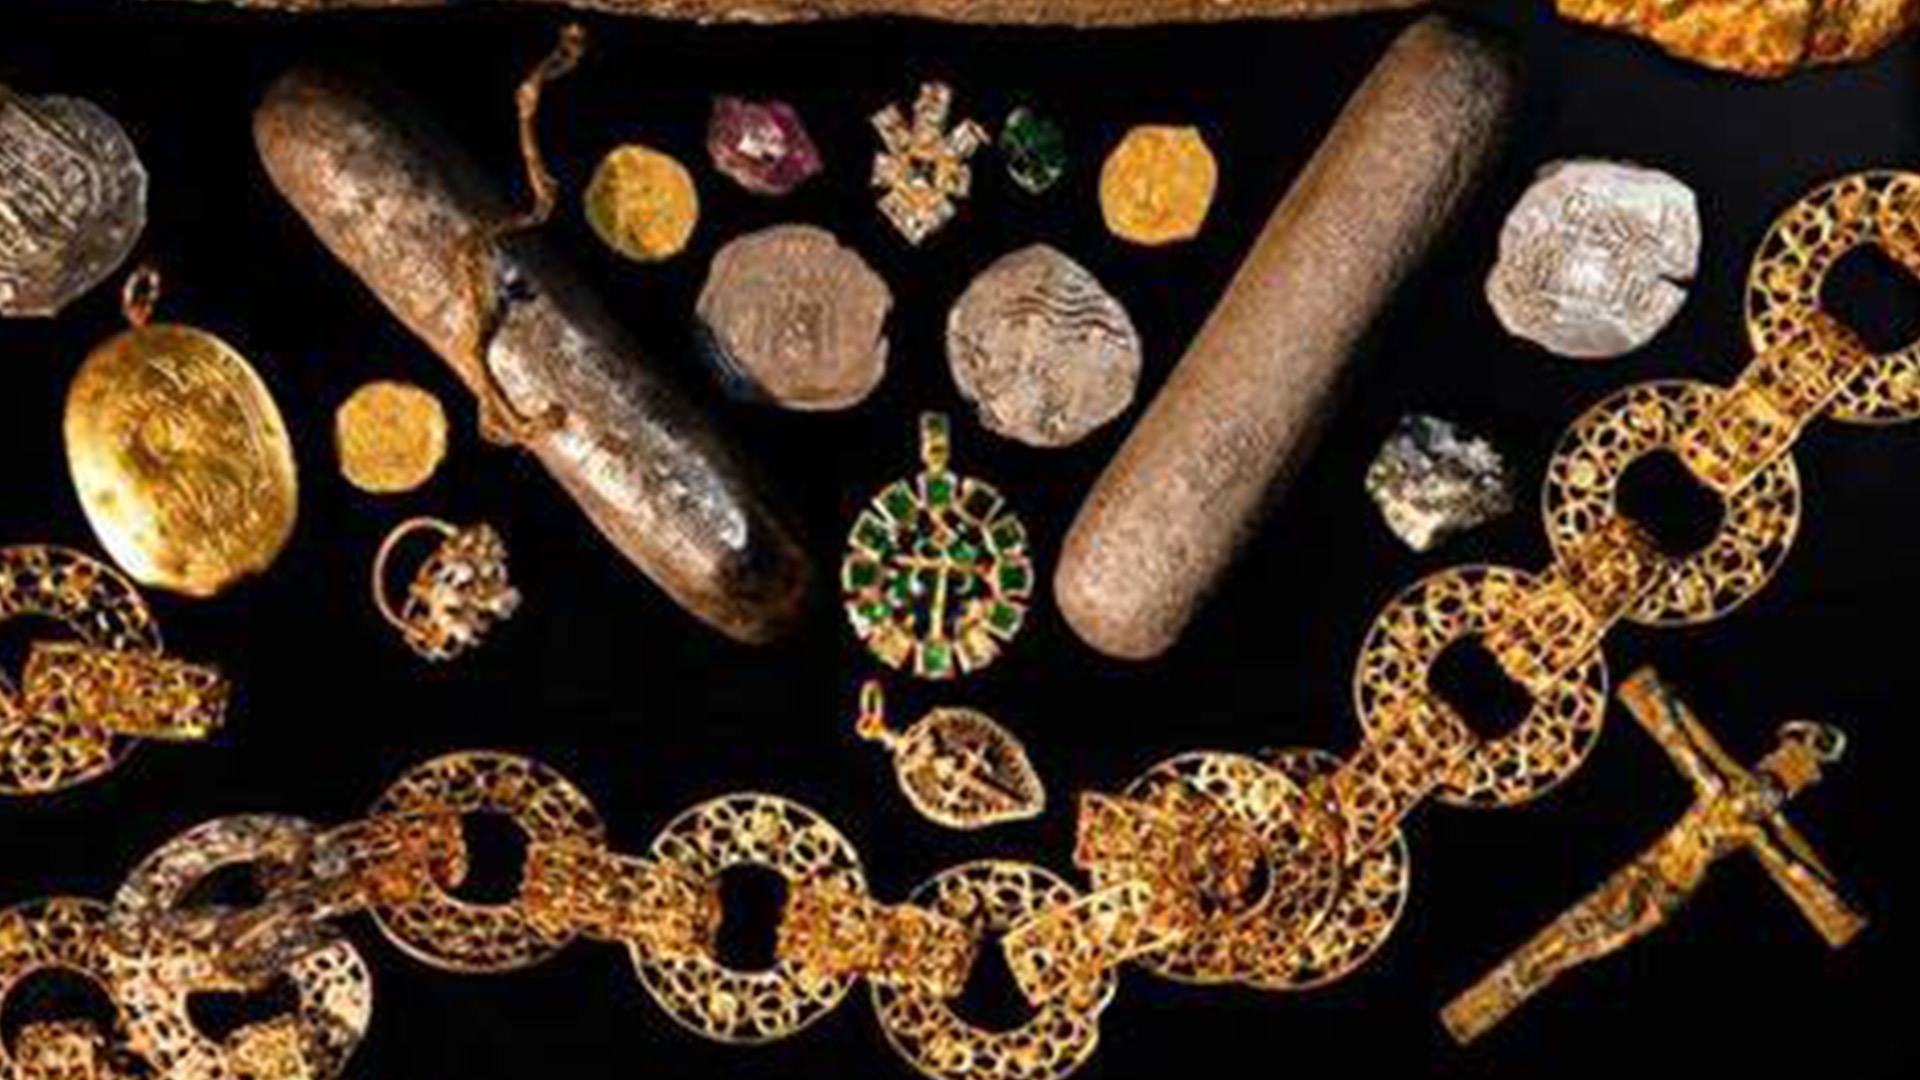 Gold, jewellery and coins from the debris trail of the Maravillas. Photograph: Brendan Chavez